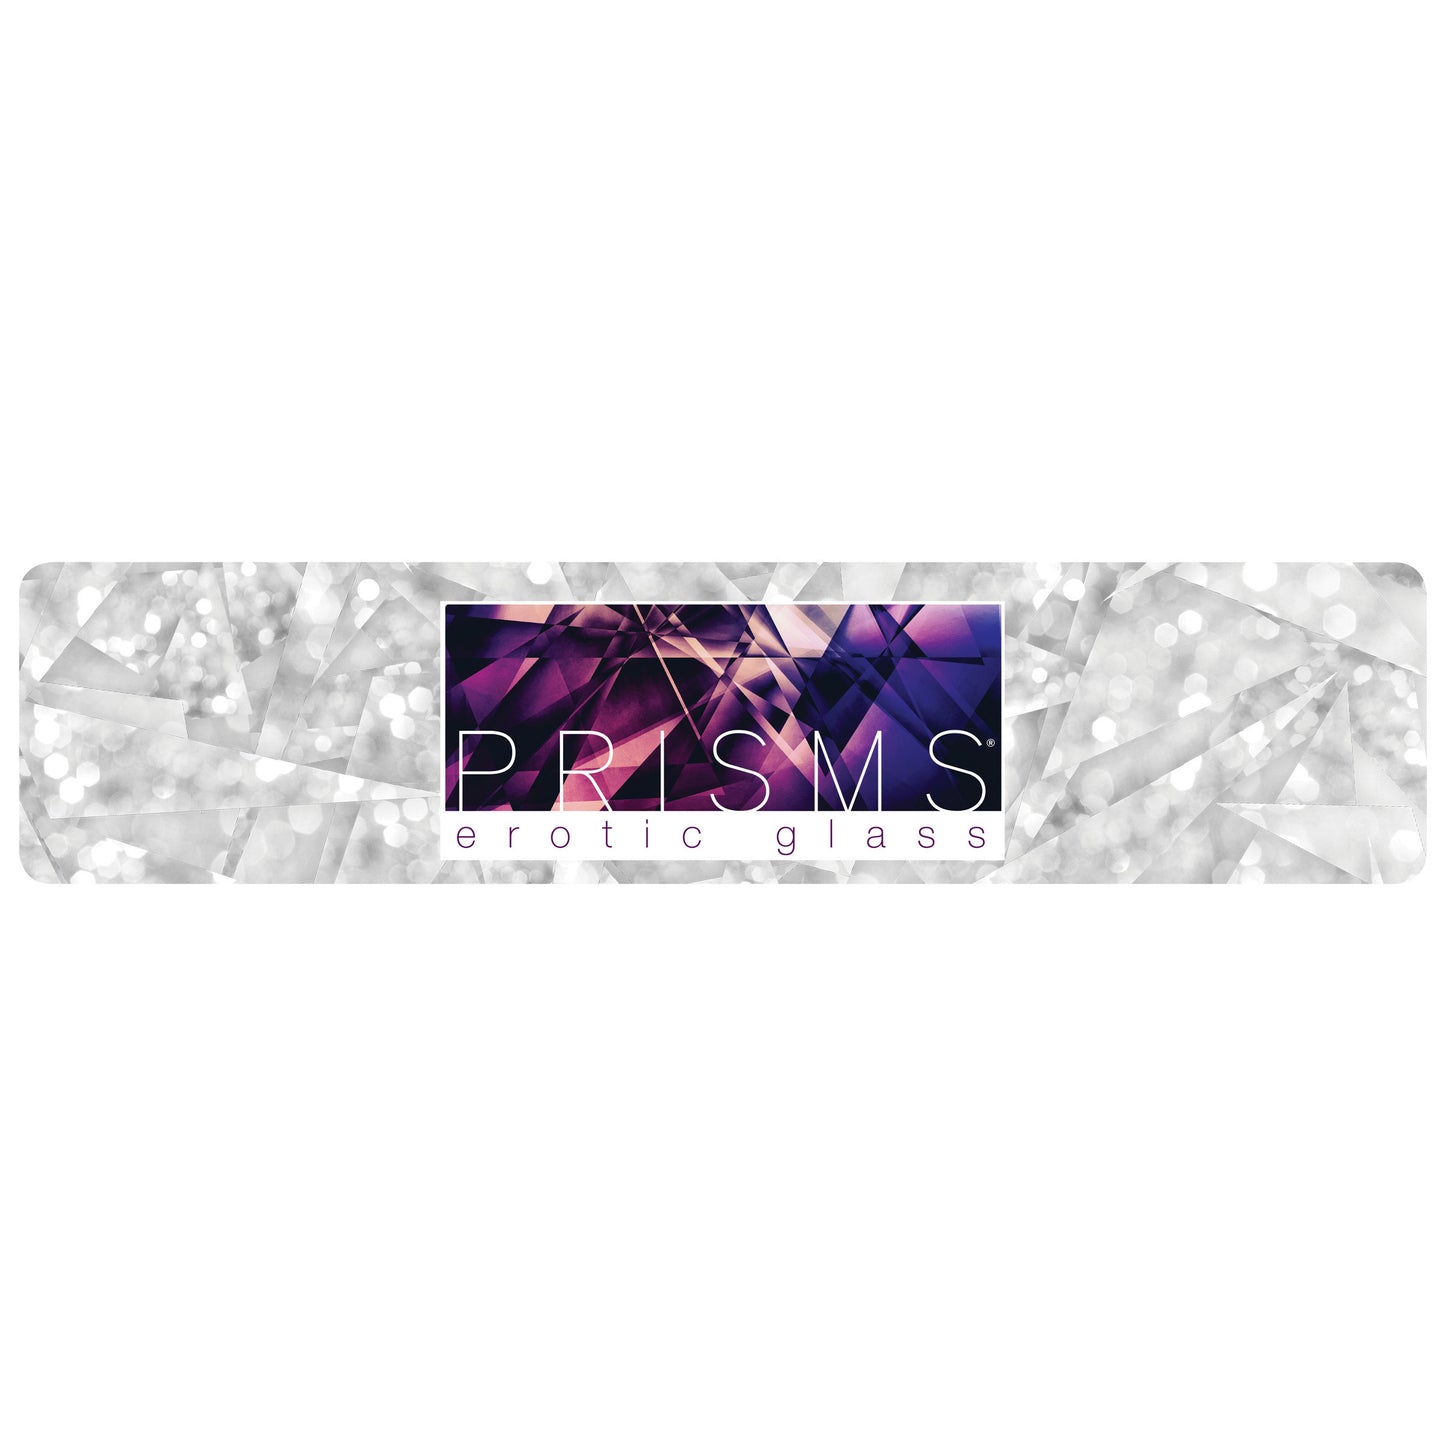 Prisms Erotic Glass Display Sign